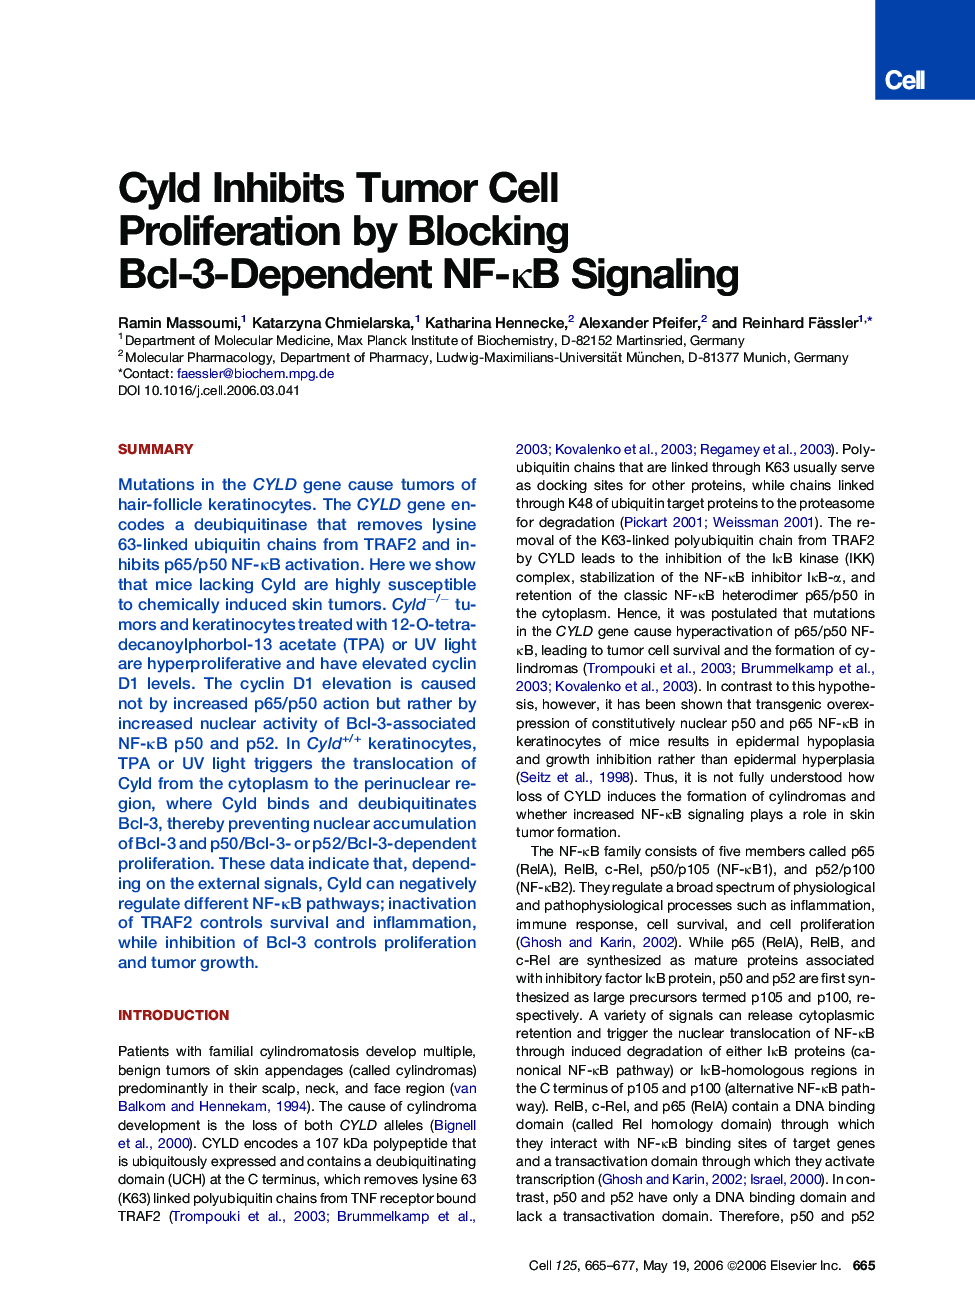 Cyld Inhibits Tumor Cell Proliferation by Blocking Bcl-3-Dependent NF-κB Signaling